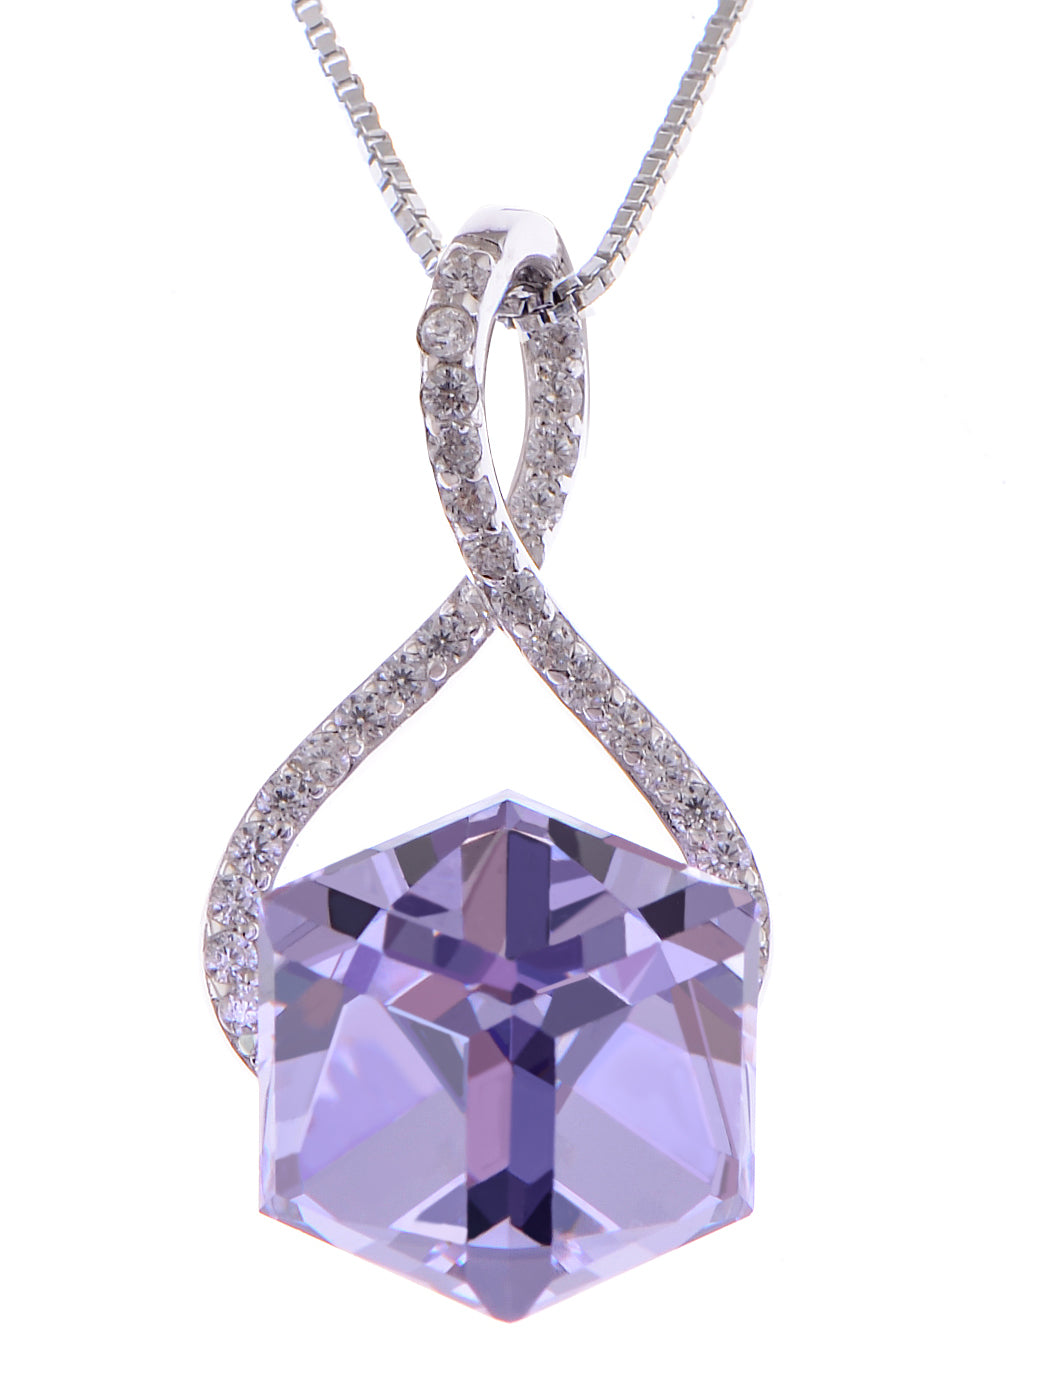 925 Silver Purple Geometric Dangling Cube Elements Infinity Necklace